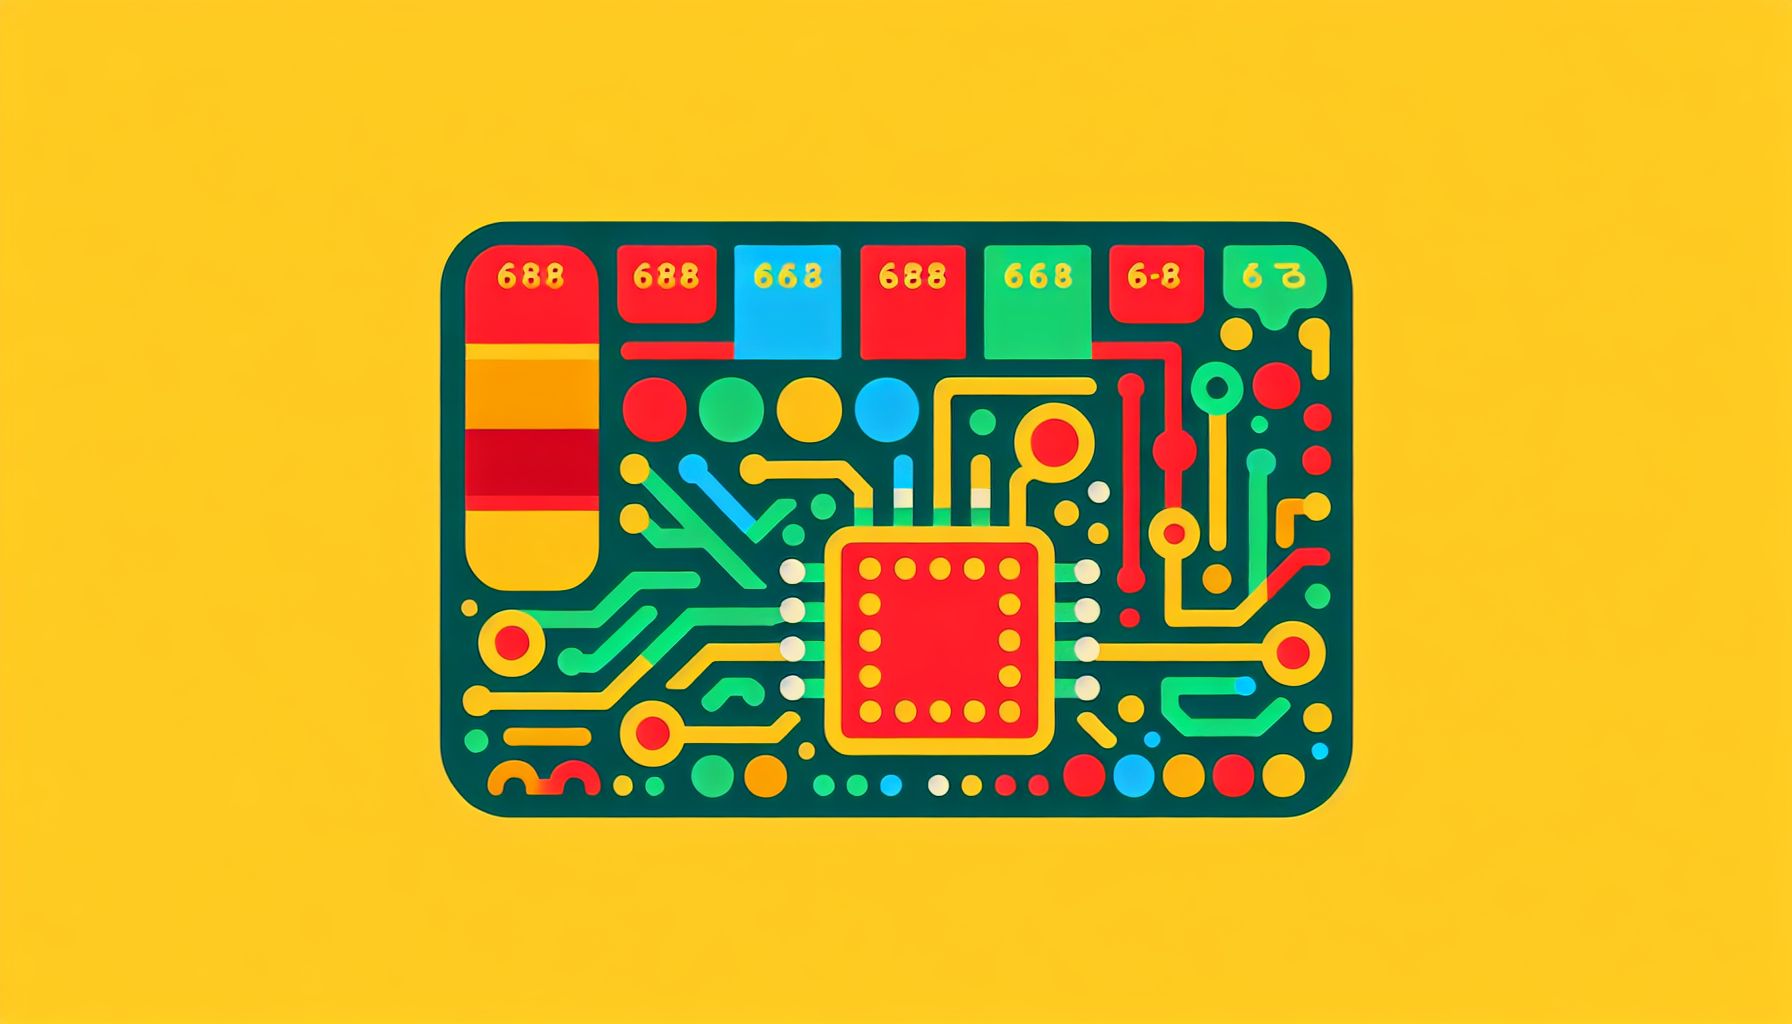 Circuitboard in flat illustration style and white background, red #f47574, green #88c7a8, yellow #fcc44b, and blue #645bc8 colors.